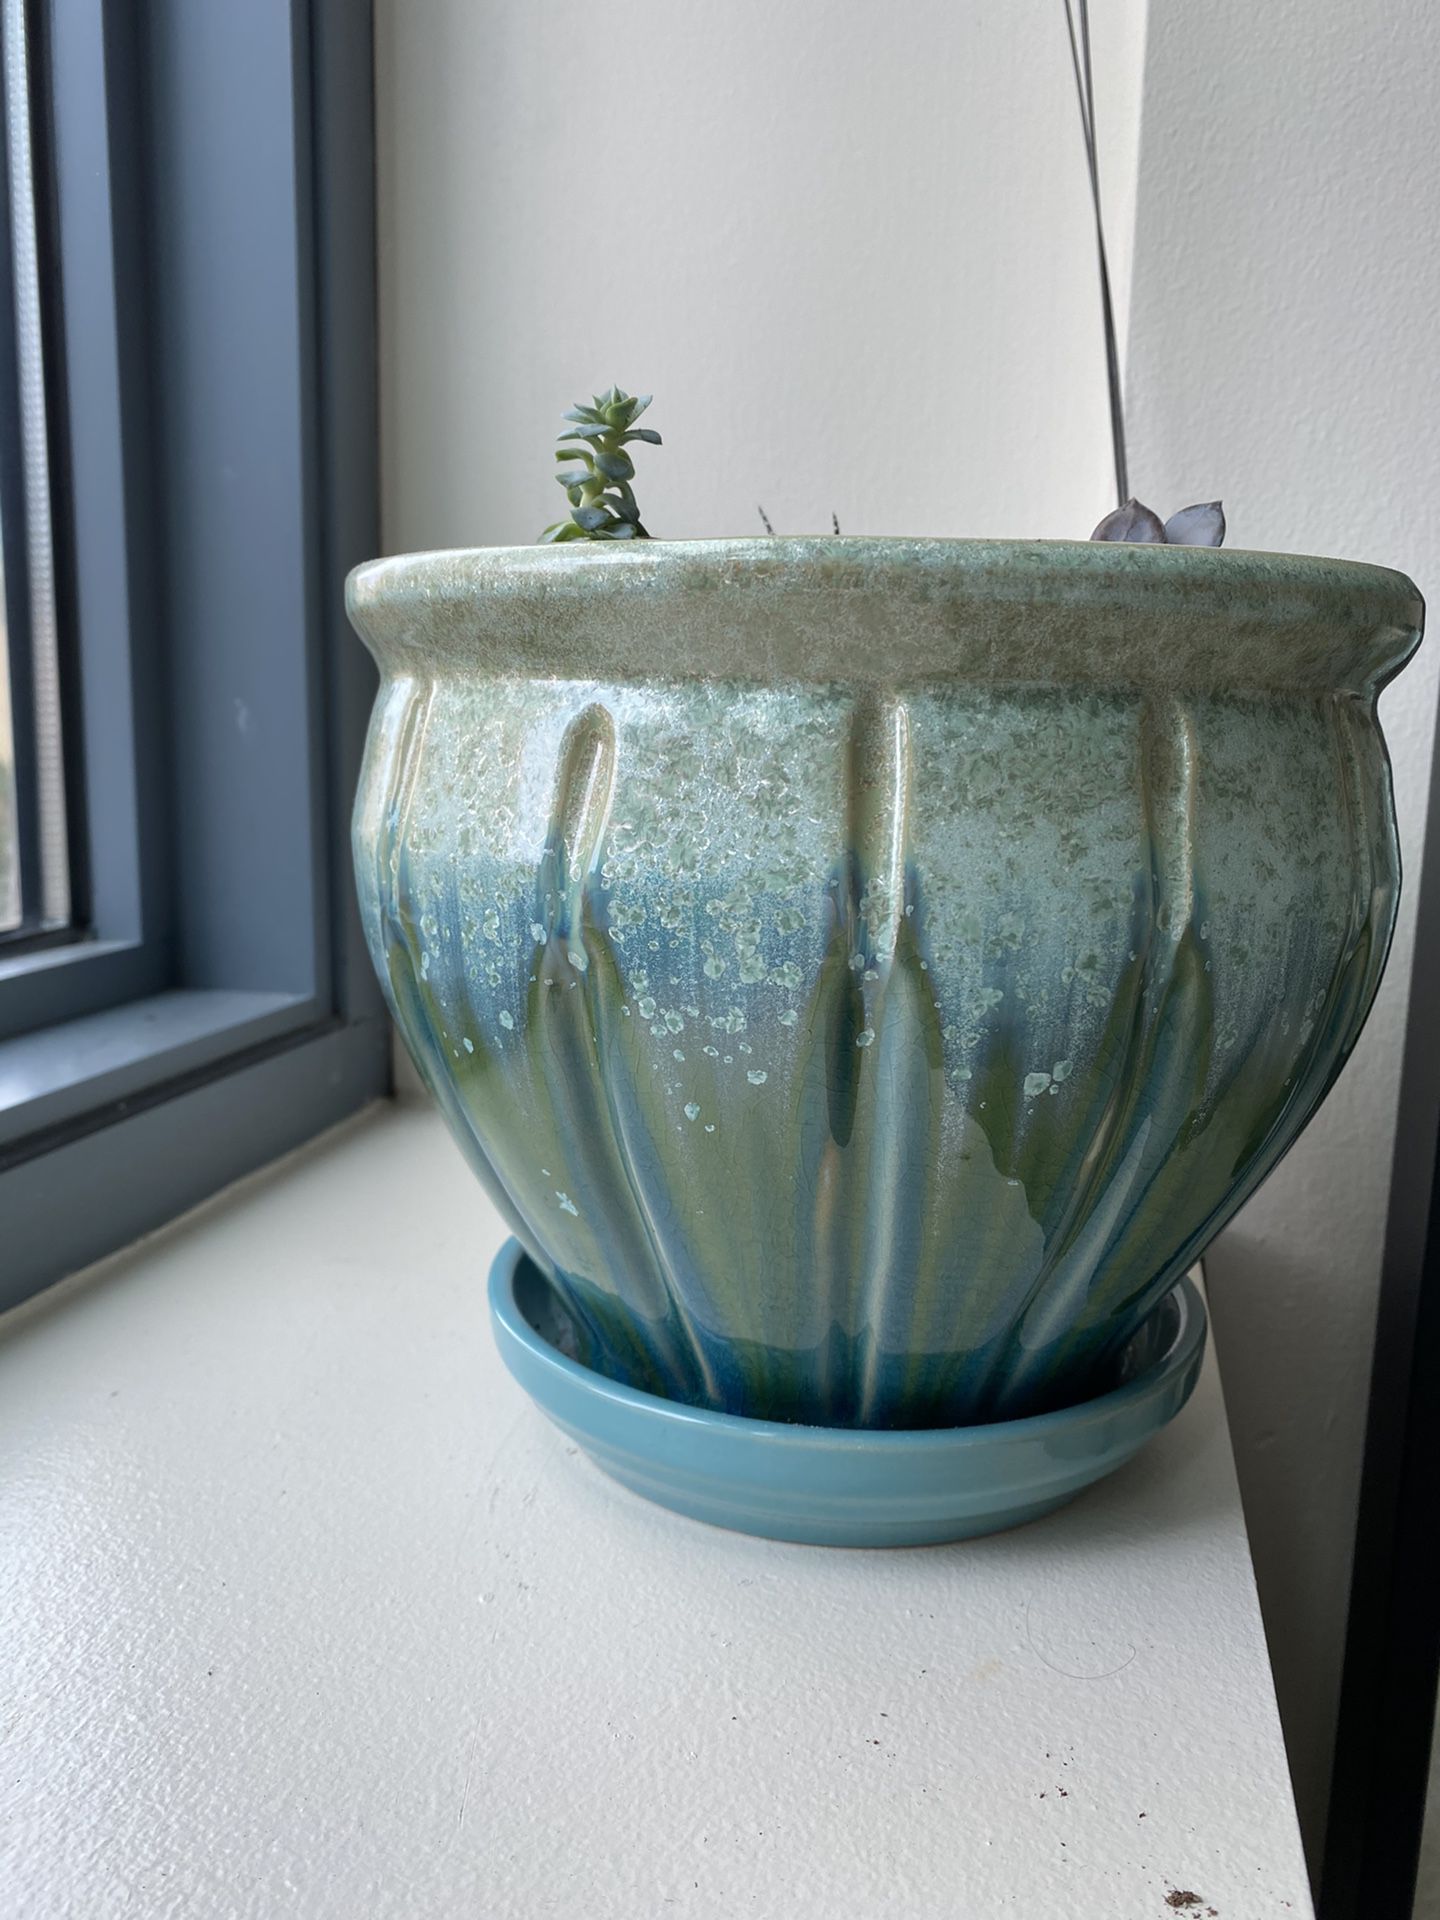 Beautiful ceramic pot with drainage tray included